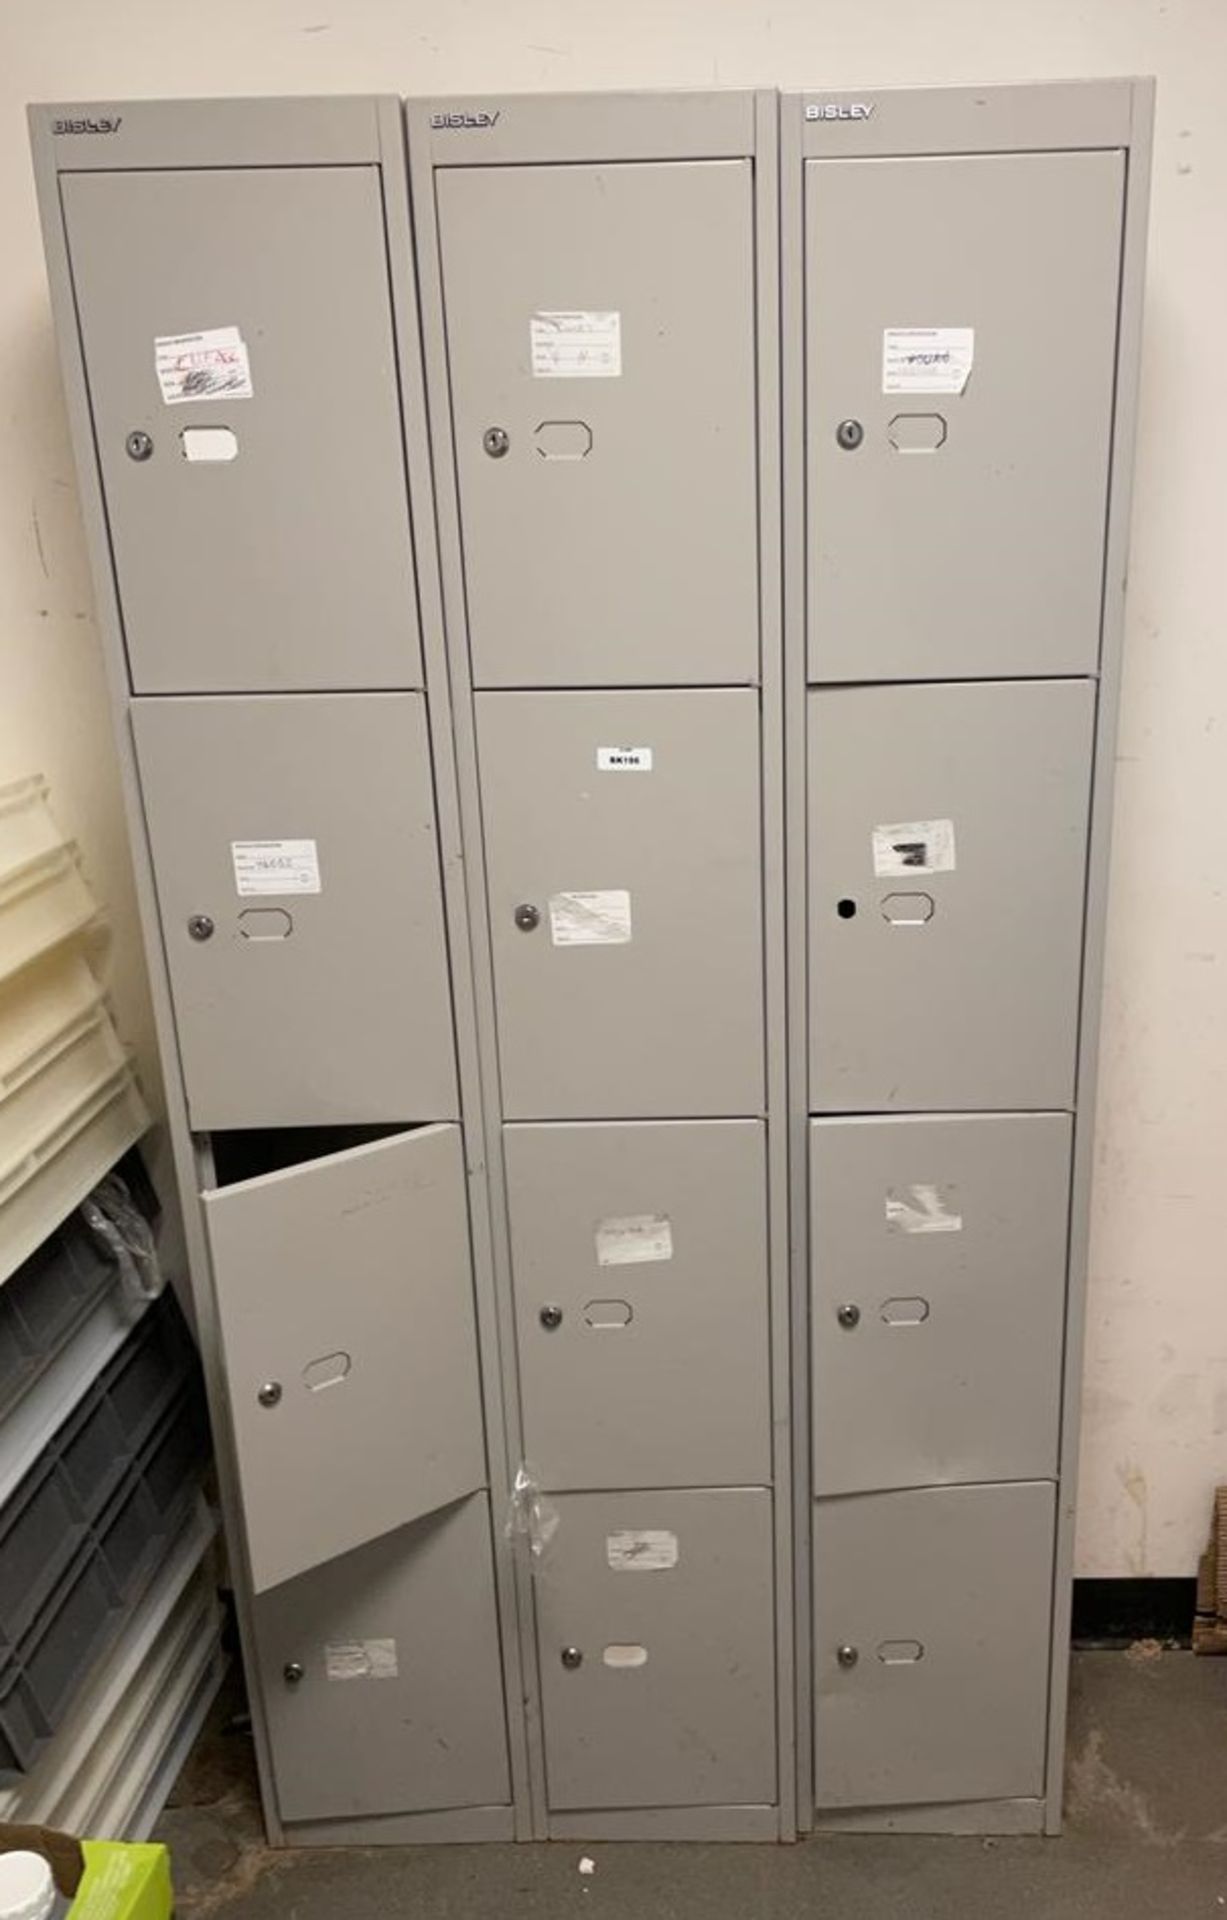 3 x Upright Four Door Staff Lockers - Keys Not Included - Ref: BK196 - CL686 - Location: - Image 2 of 4